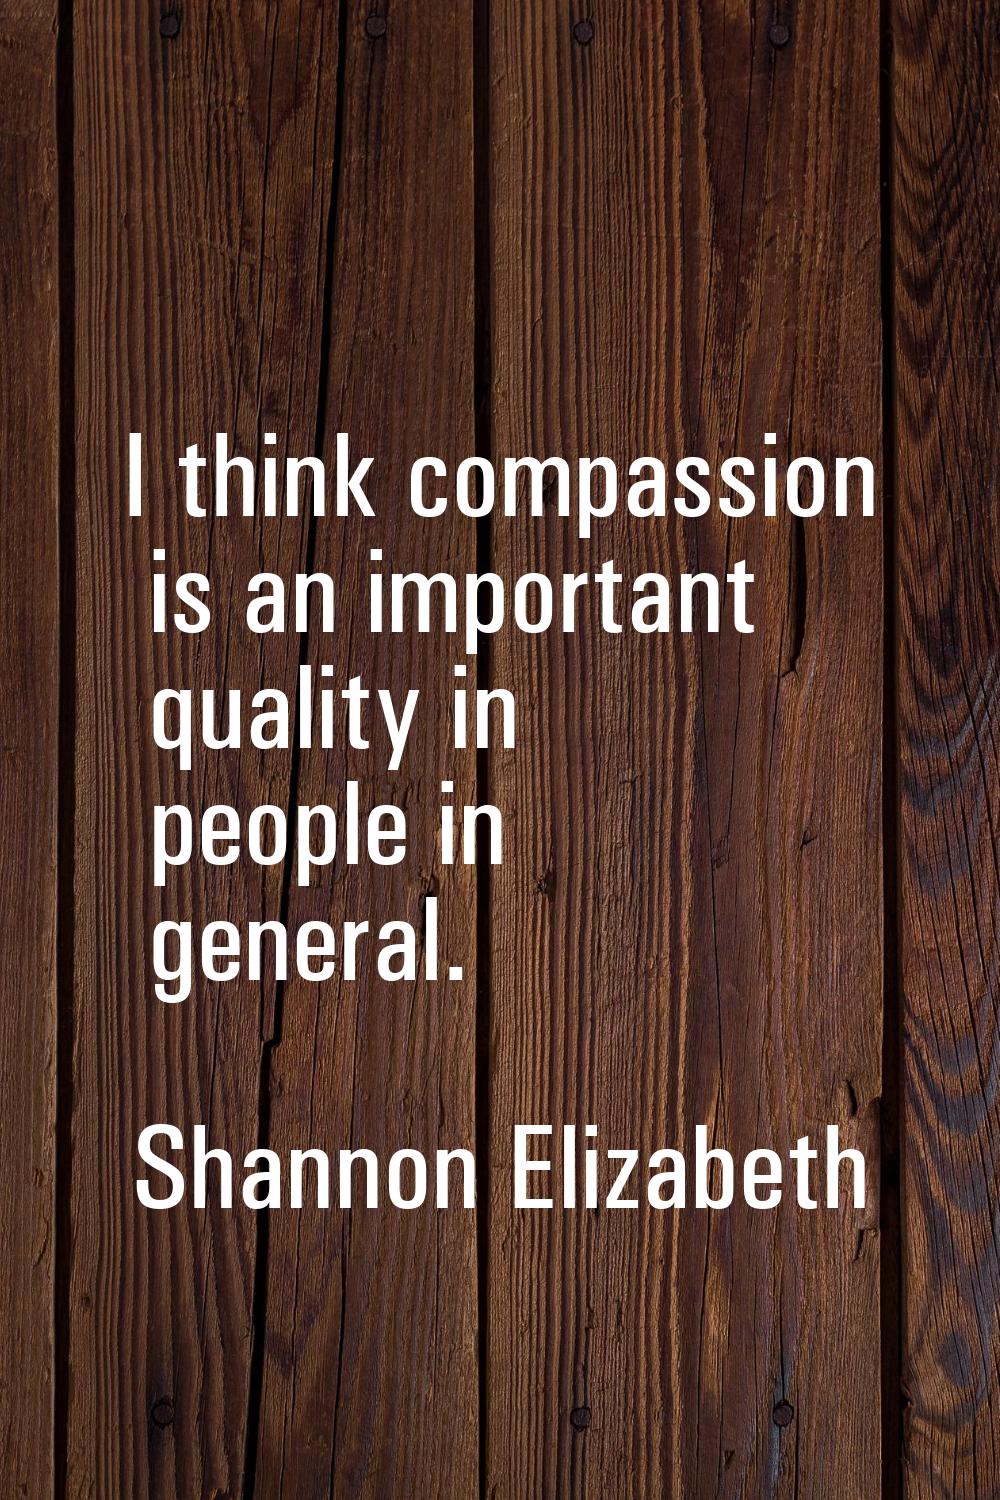 I think compassion is an important quality in people in general.